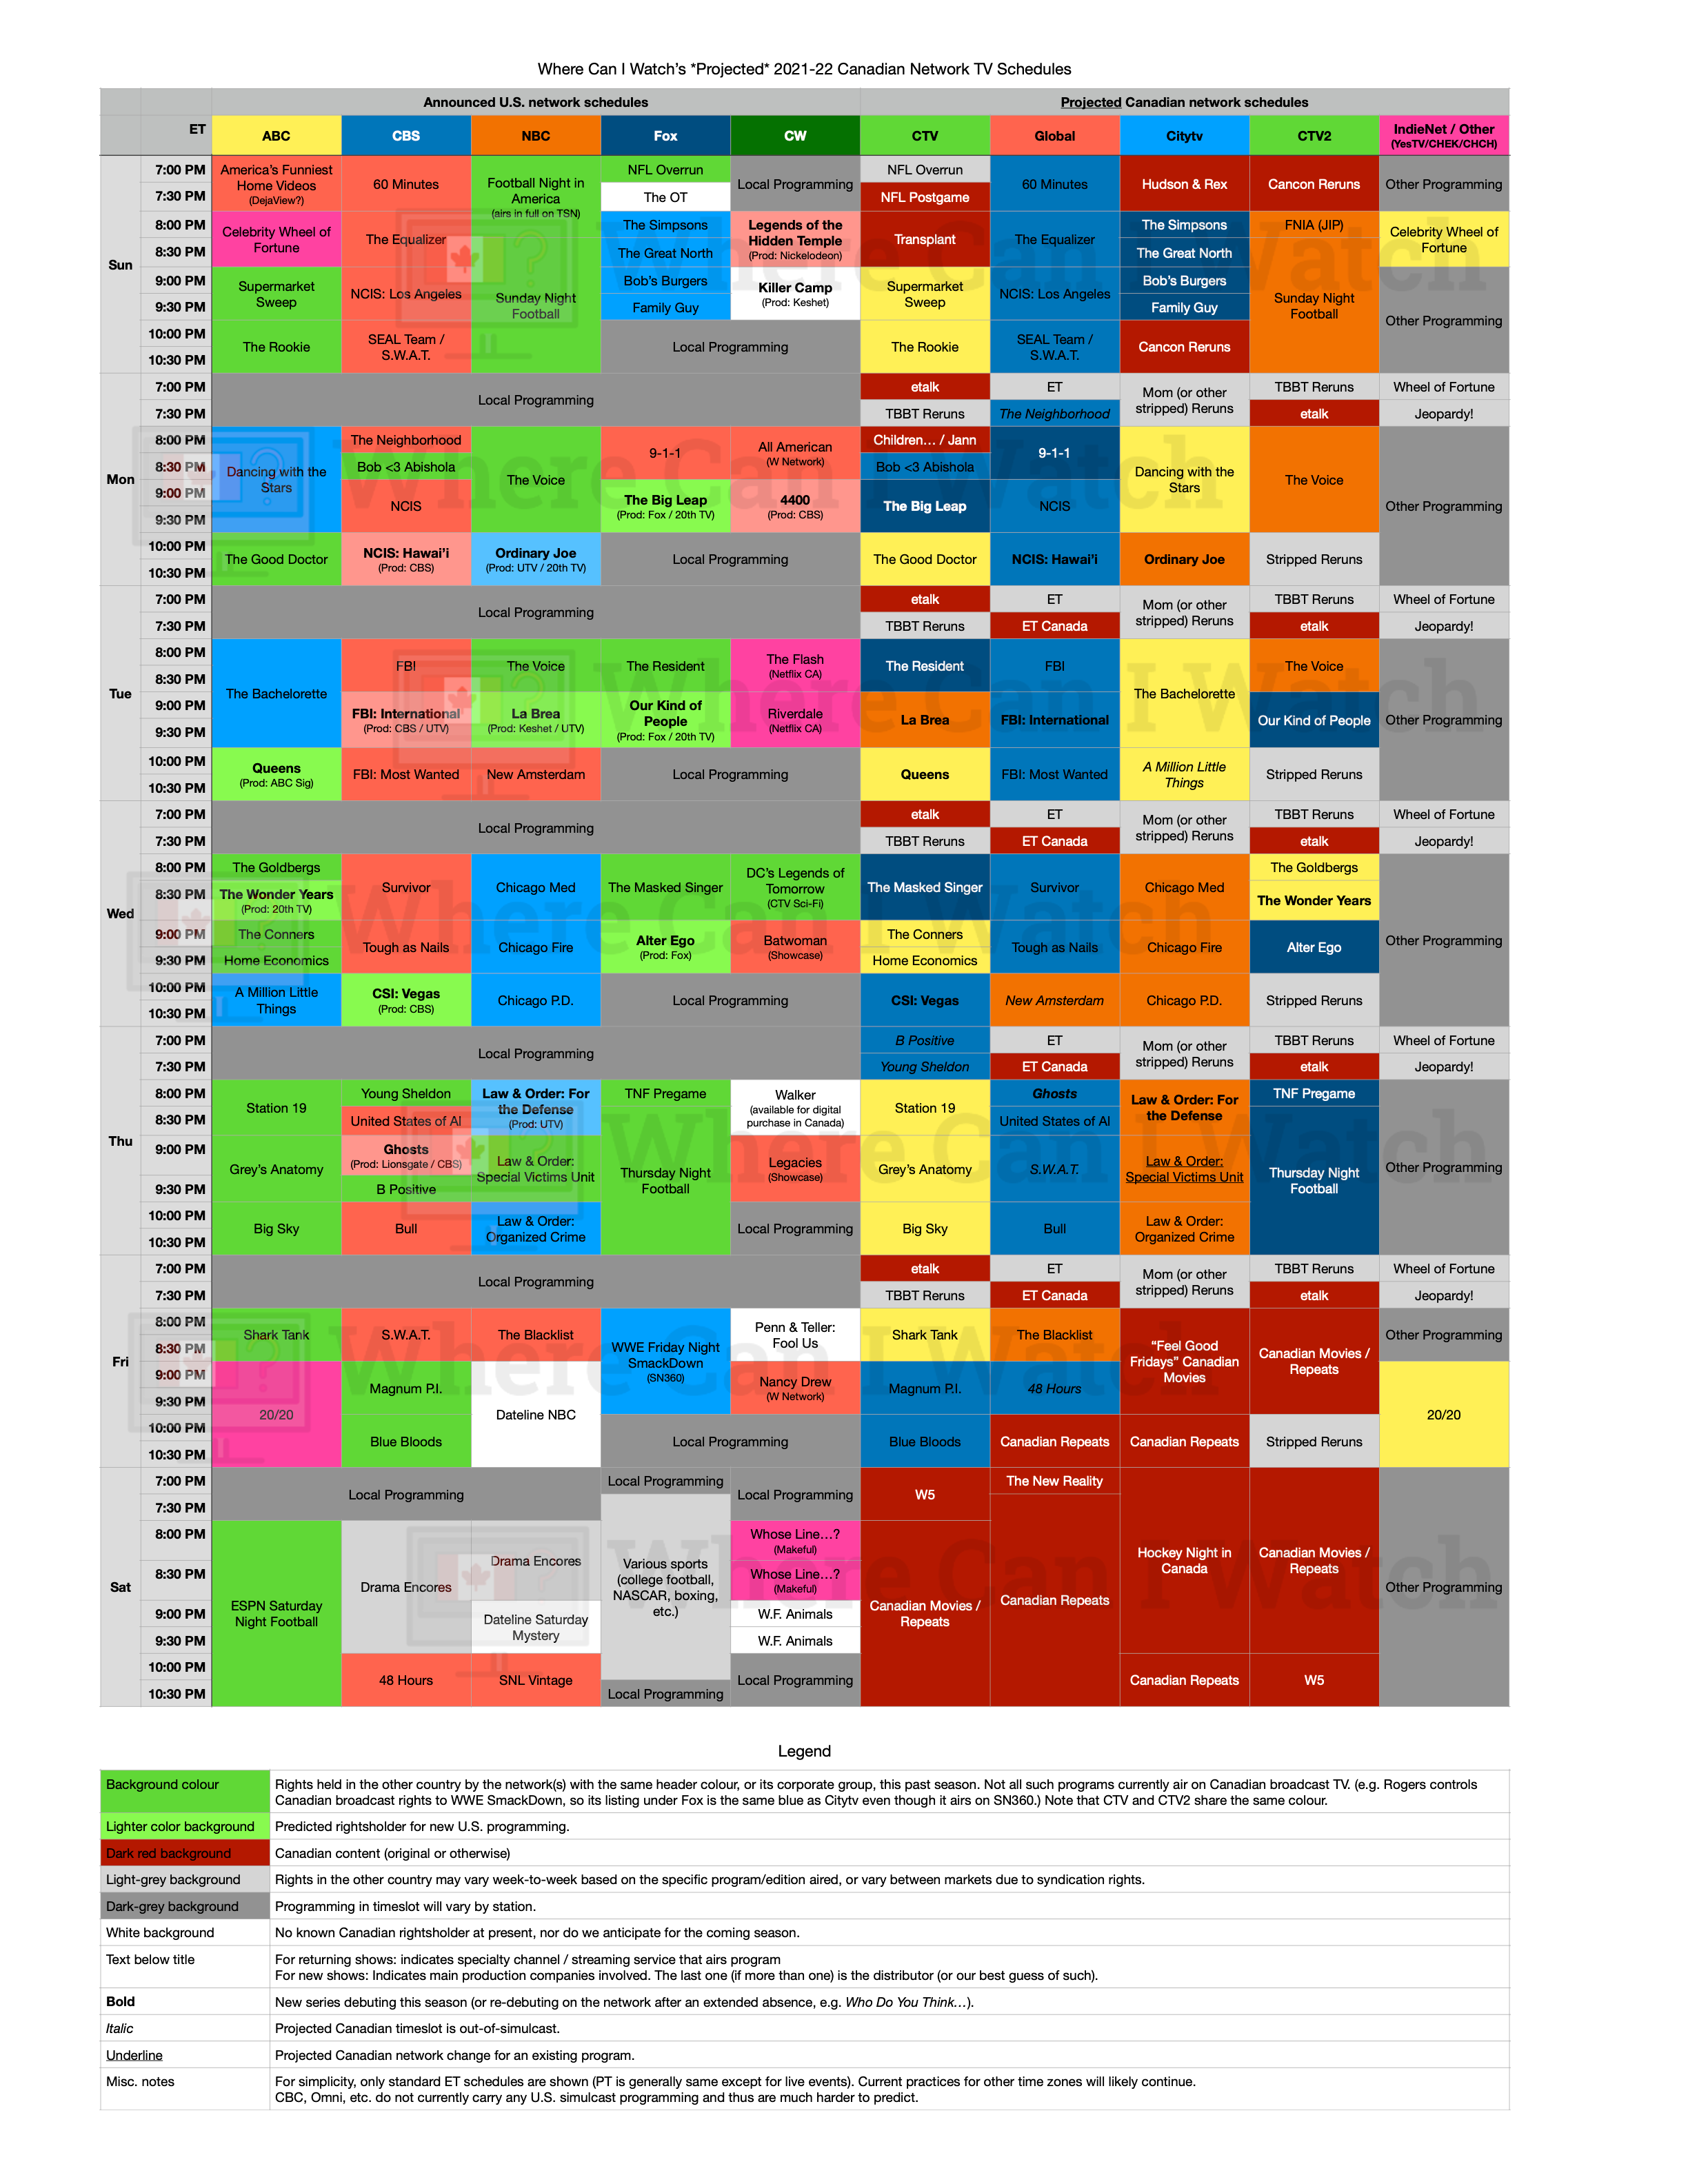 A television schedule for the 2021–22 season, displaying the announced schedules of the U.S. broadcast networks and projected scheduled for the Canadian networks. Due to the nature of the content we are currently unable to provide a screen-readable version.